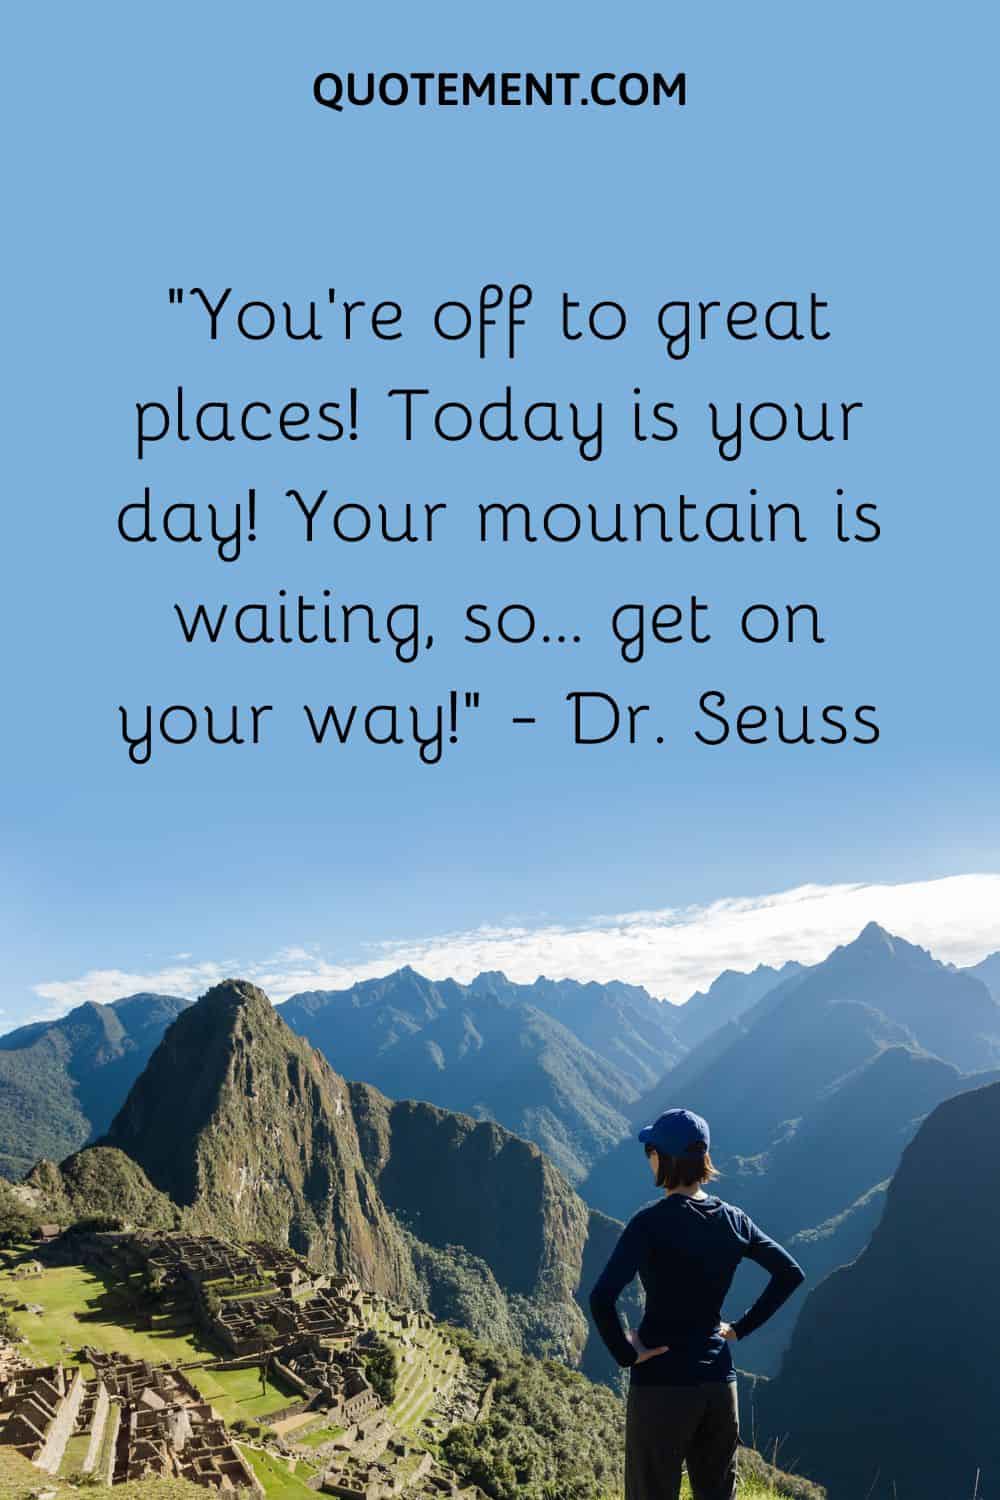 “You’re off to great places! Today is your day! Your mountain is waiting, so… get on your way!” — Dr. Seuss